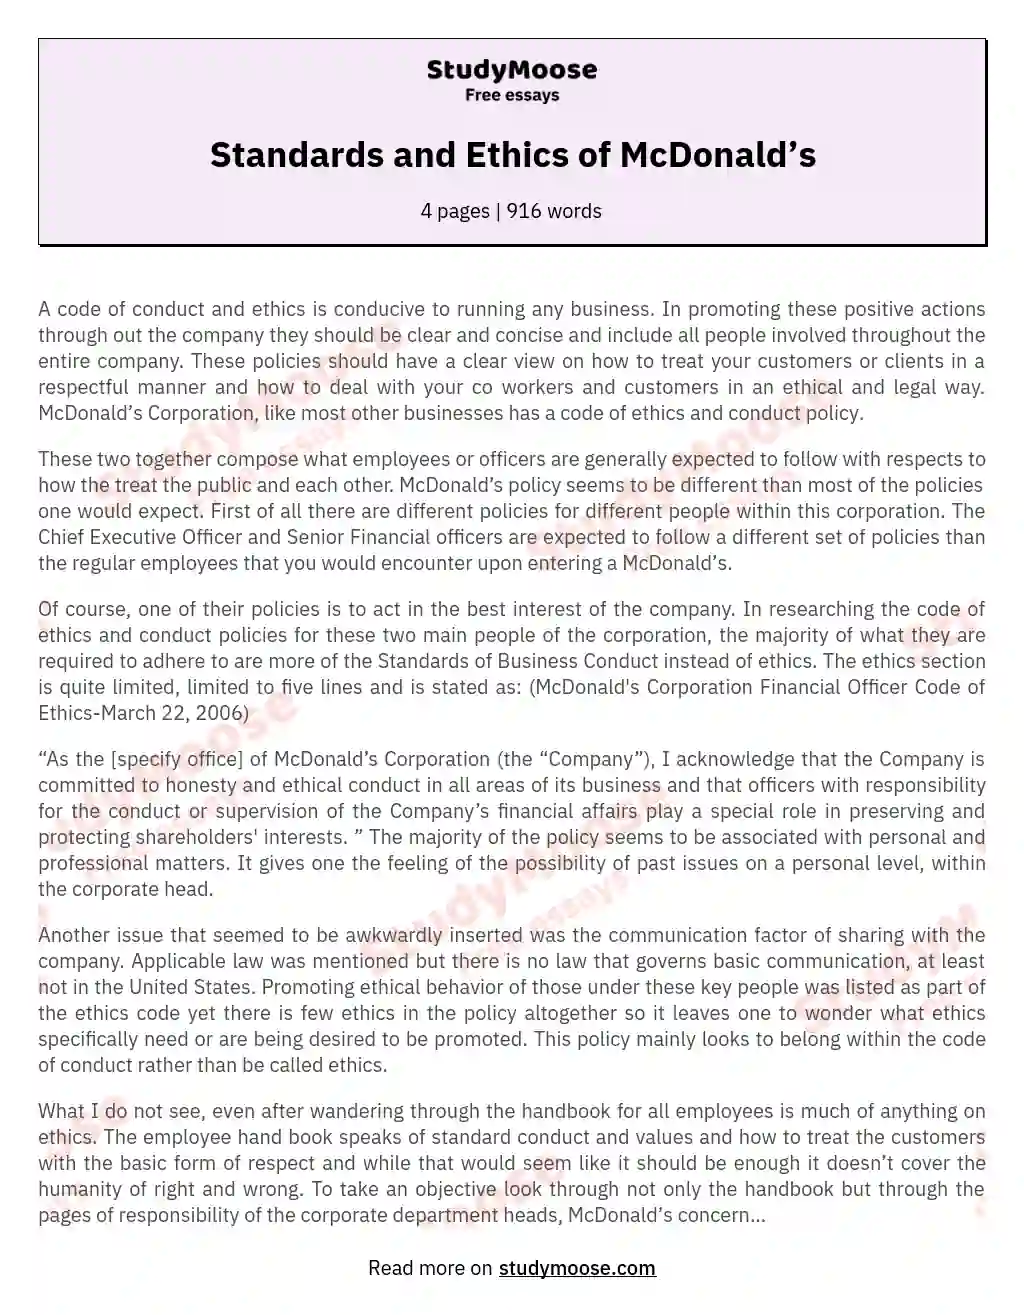 mcdonald's ethical issues case study